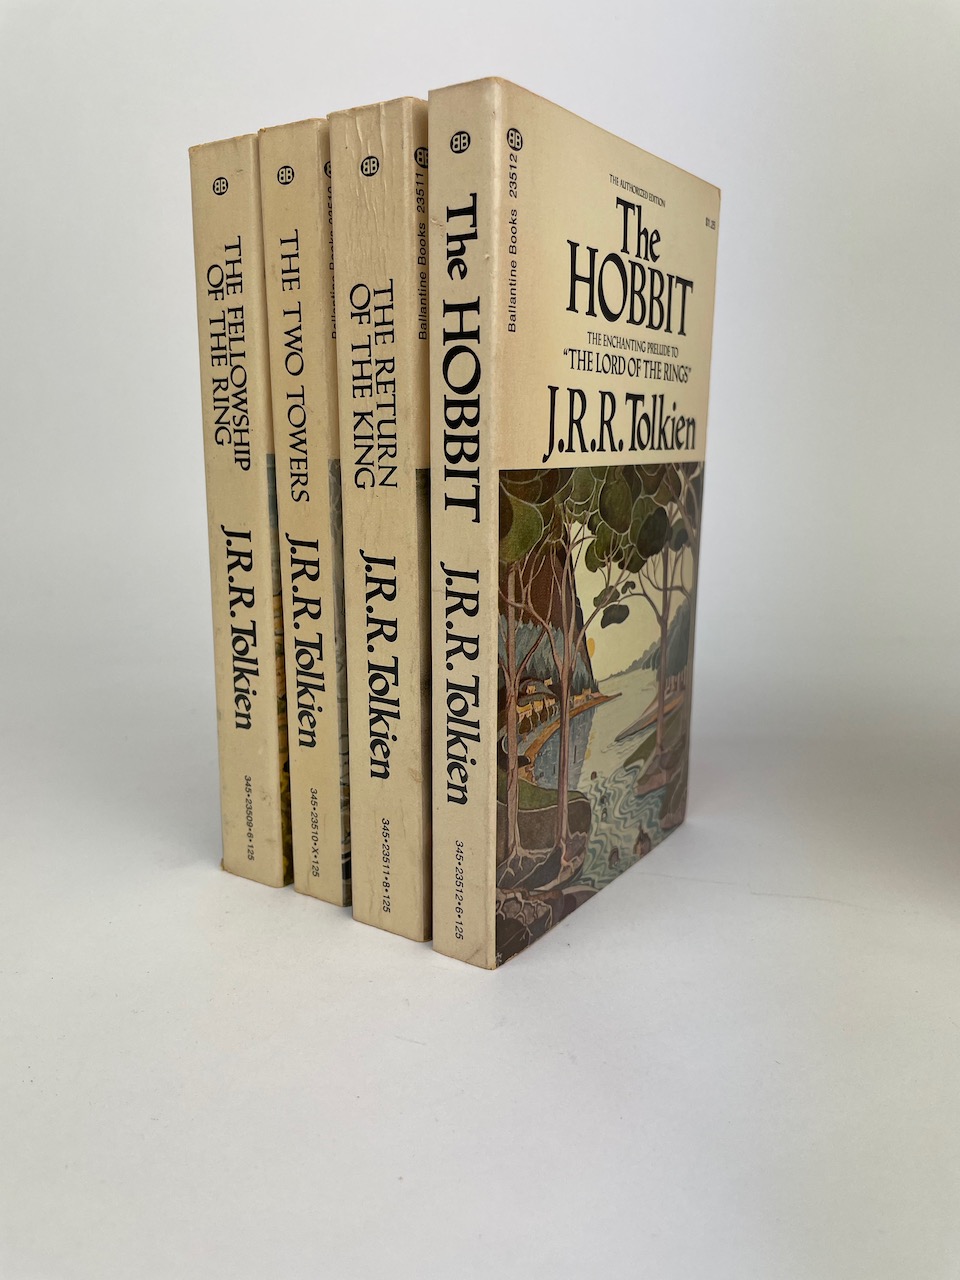 The Hobbit and The Lord of the Rings, Four Paperback Book Boxset from 1973, Red Slipcase 9